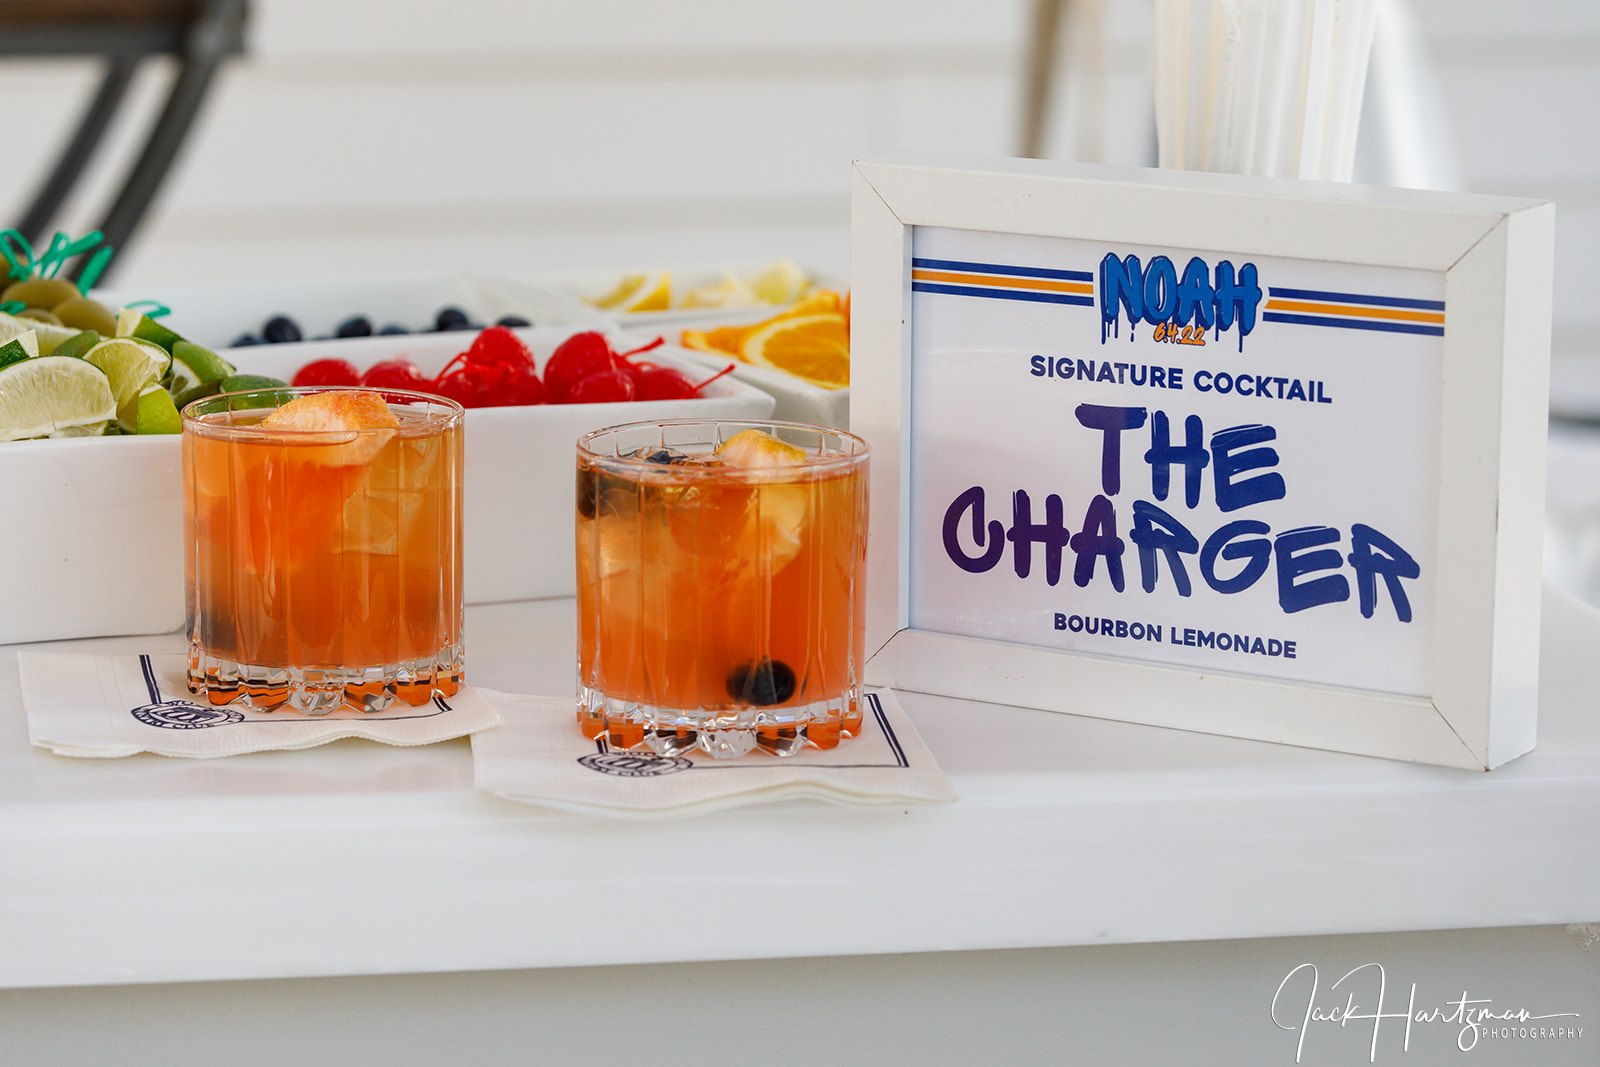 Signature Cocktail at Noah's Chargers-Inspired Urban, Graffiti Bar Mitzvah at Woodmont Country Club in Rockville, MD | Pop Color Events | Adding a Pop of Color to Bar & Bat Mitzvahs in DC, MD & VA | Photo by: Jack Hartzman, Washington Talent Agency